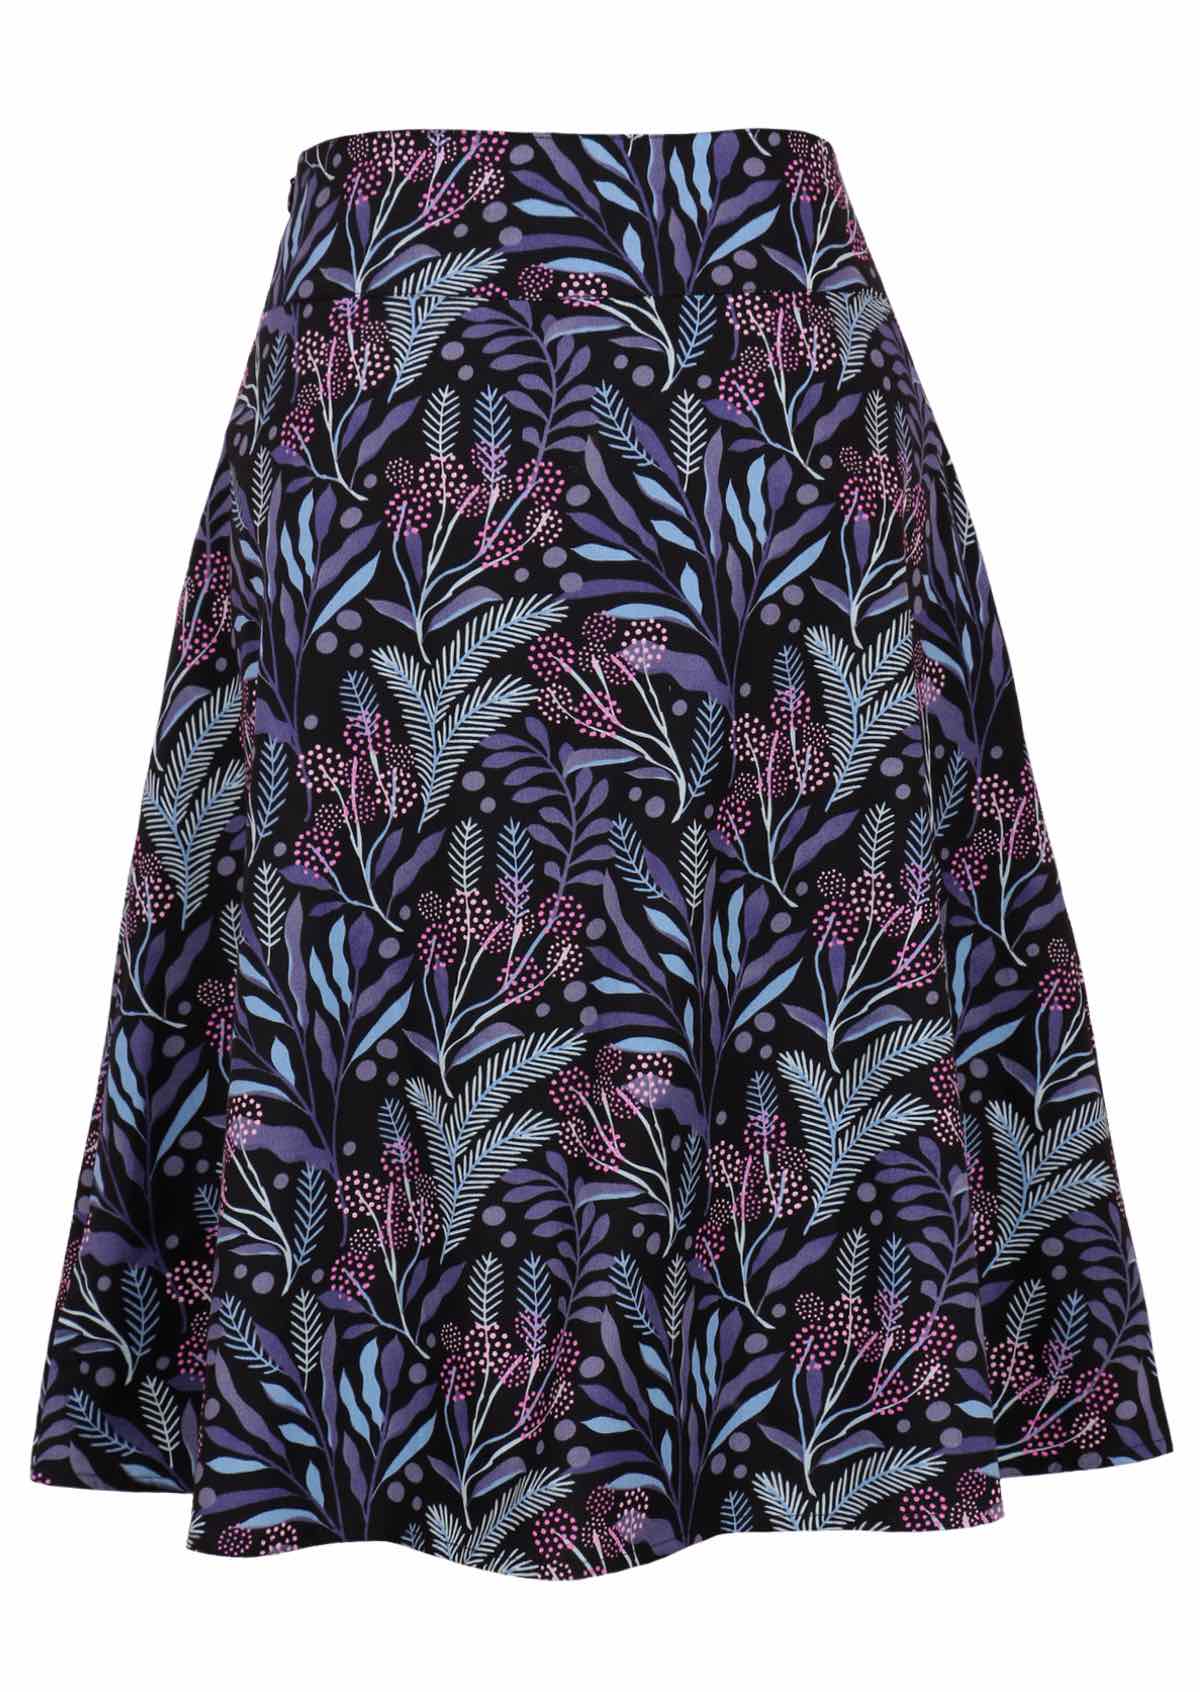 Over knee length cotton skirt in gorgeous botanical print in blues and pinks on black